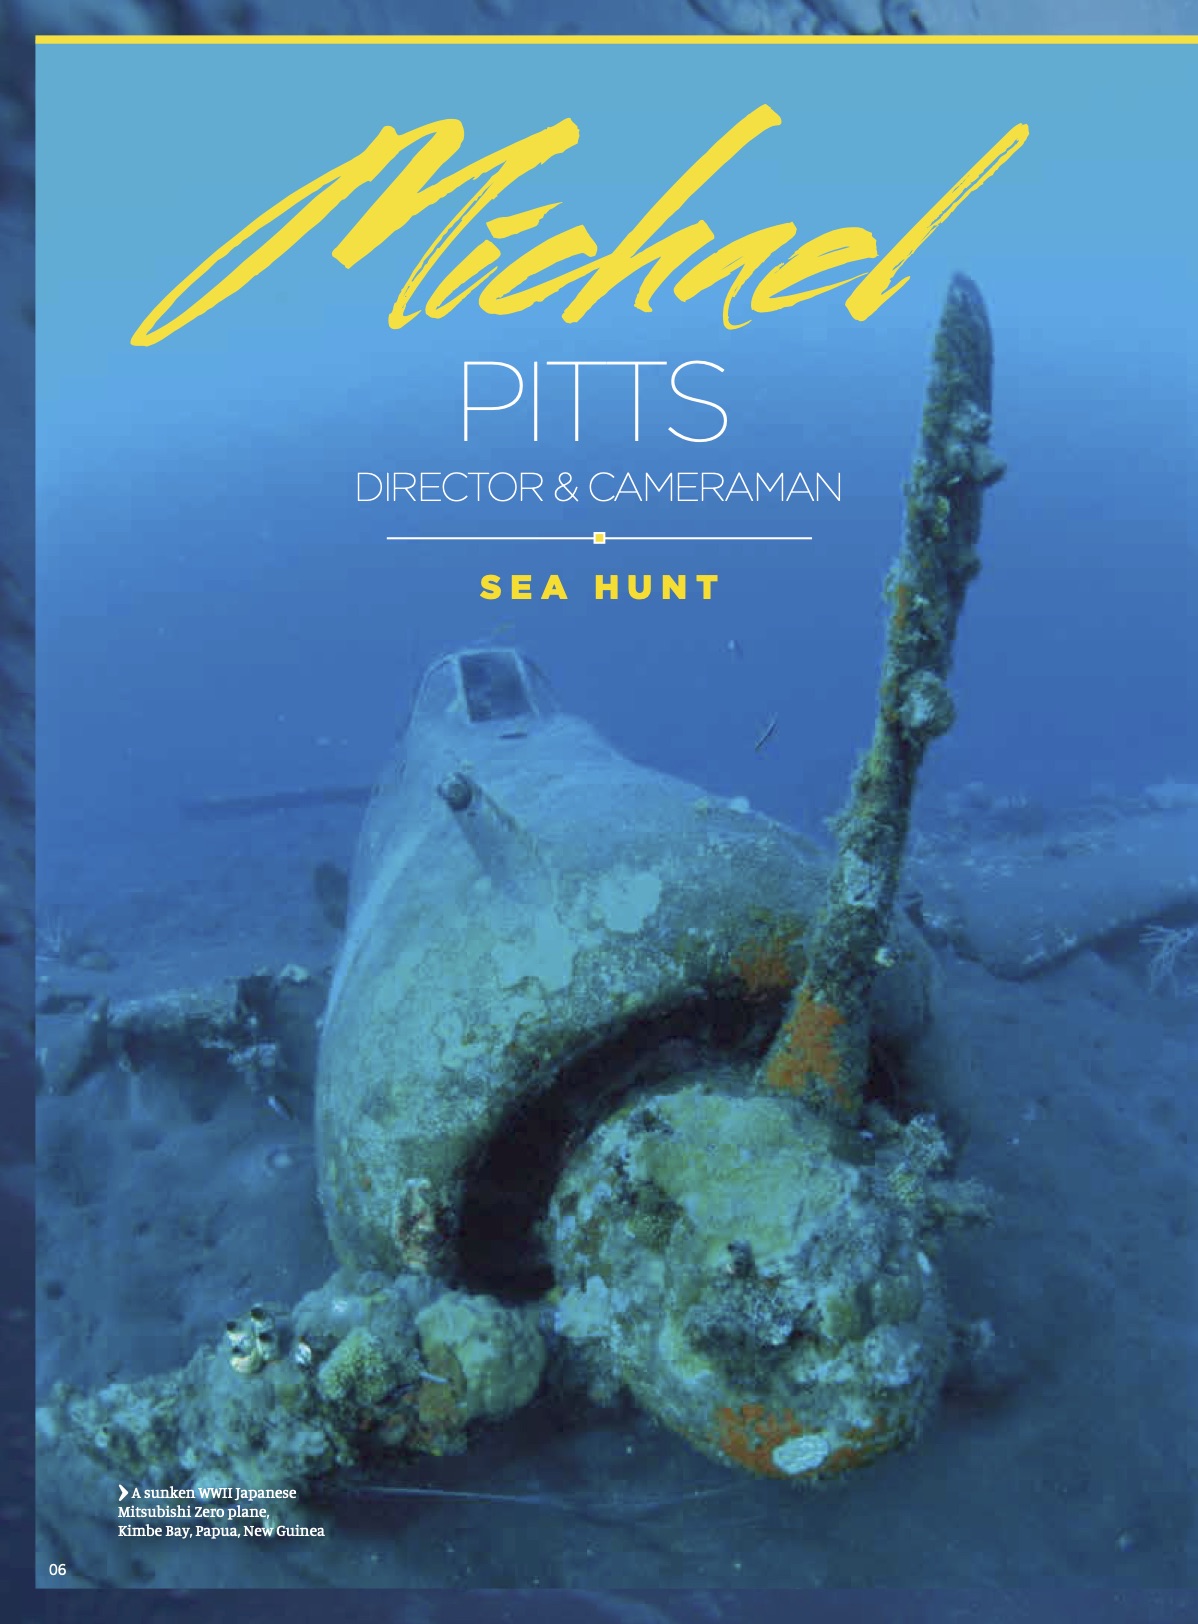 Collection 3 - Michael Pitts' three-part series "Sea Hunt"